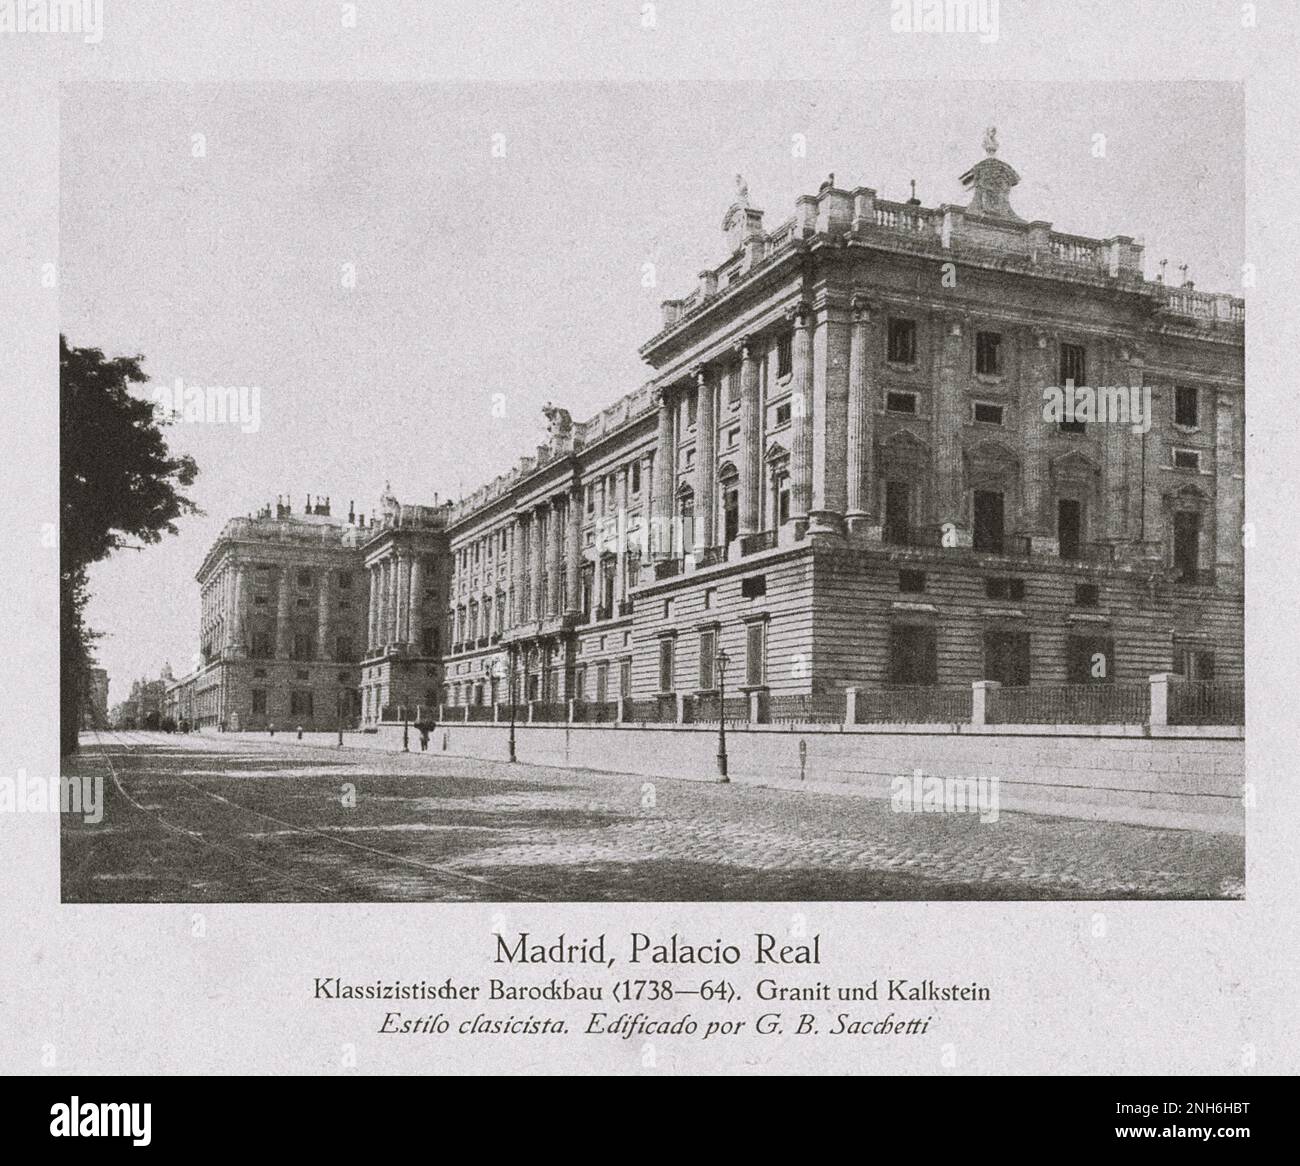 Old Spain. Vintage photo of Royal Palace of Madrid (Palacio Real de Madrid). Classicist Baroque building (1738-1764). Granite and limestone. The official residence of the Spanish royal family at the city of Madrid, although now used only for state ceremonies. Stock Photo